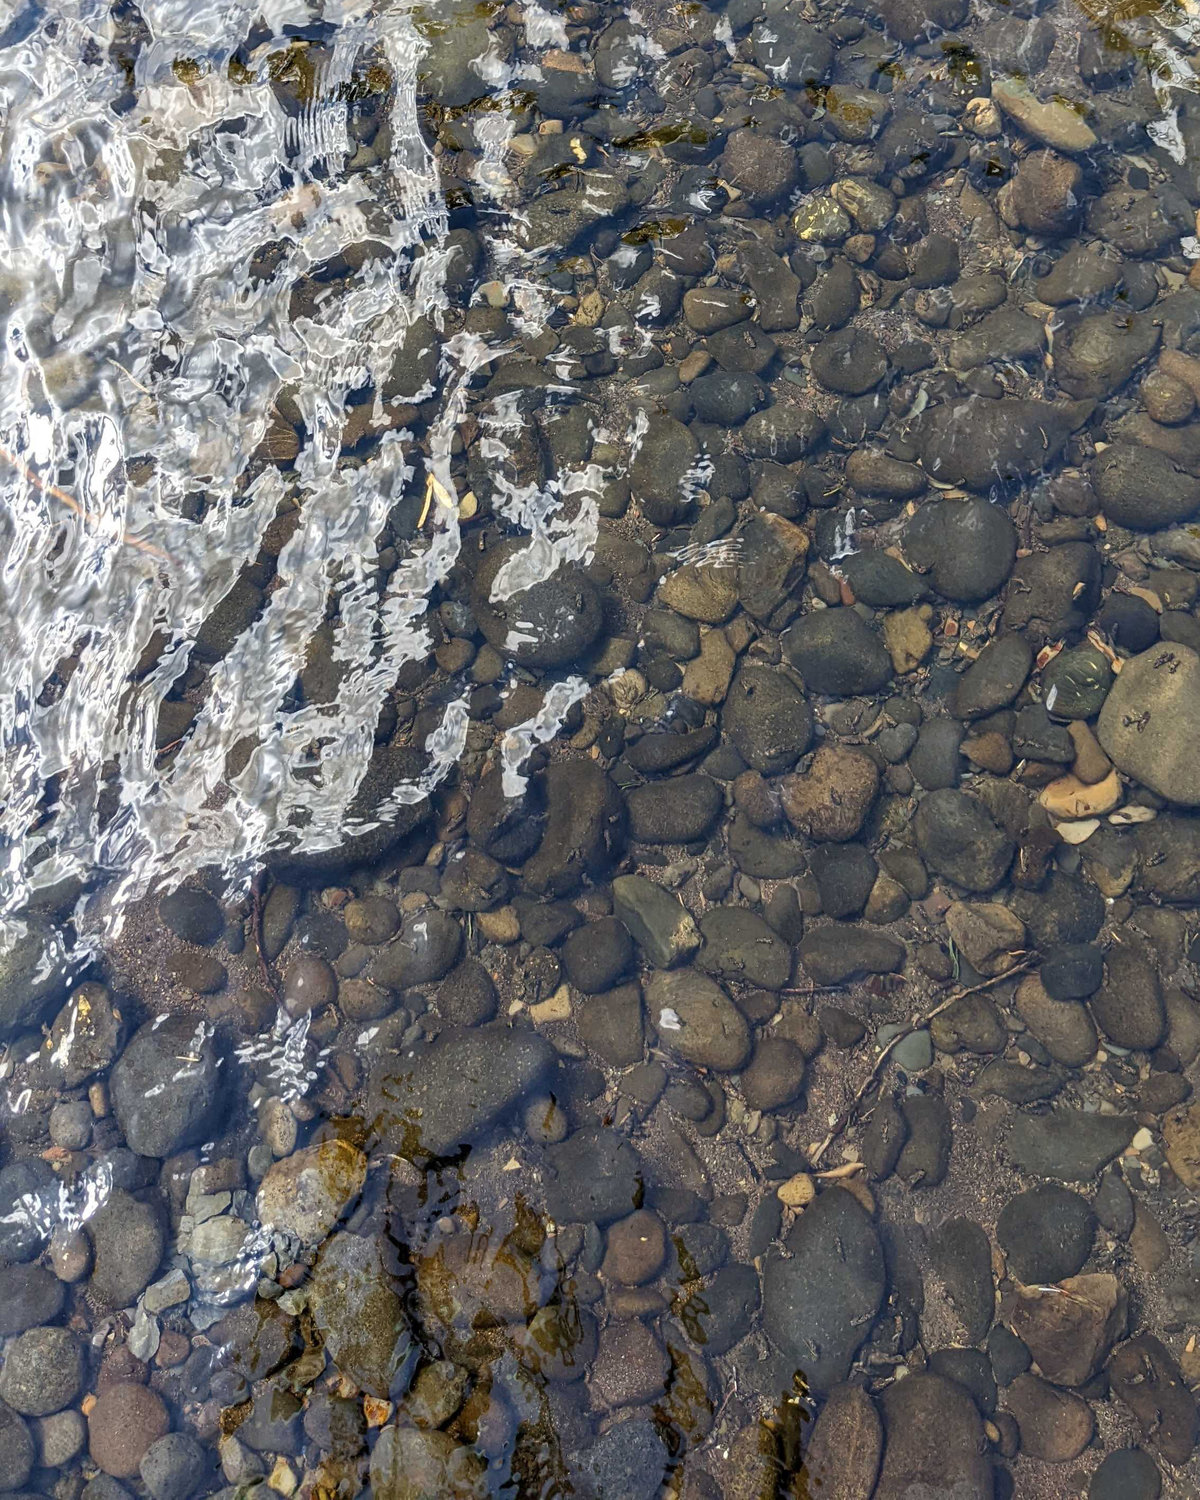 Rocks are seen under the surface of the Chehalis River on Saturday near Pe Ell.